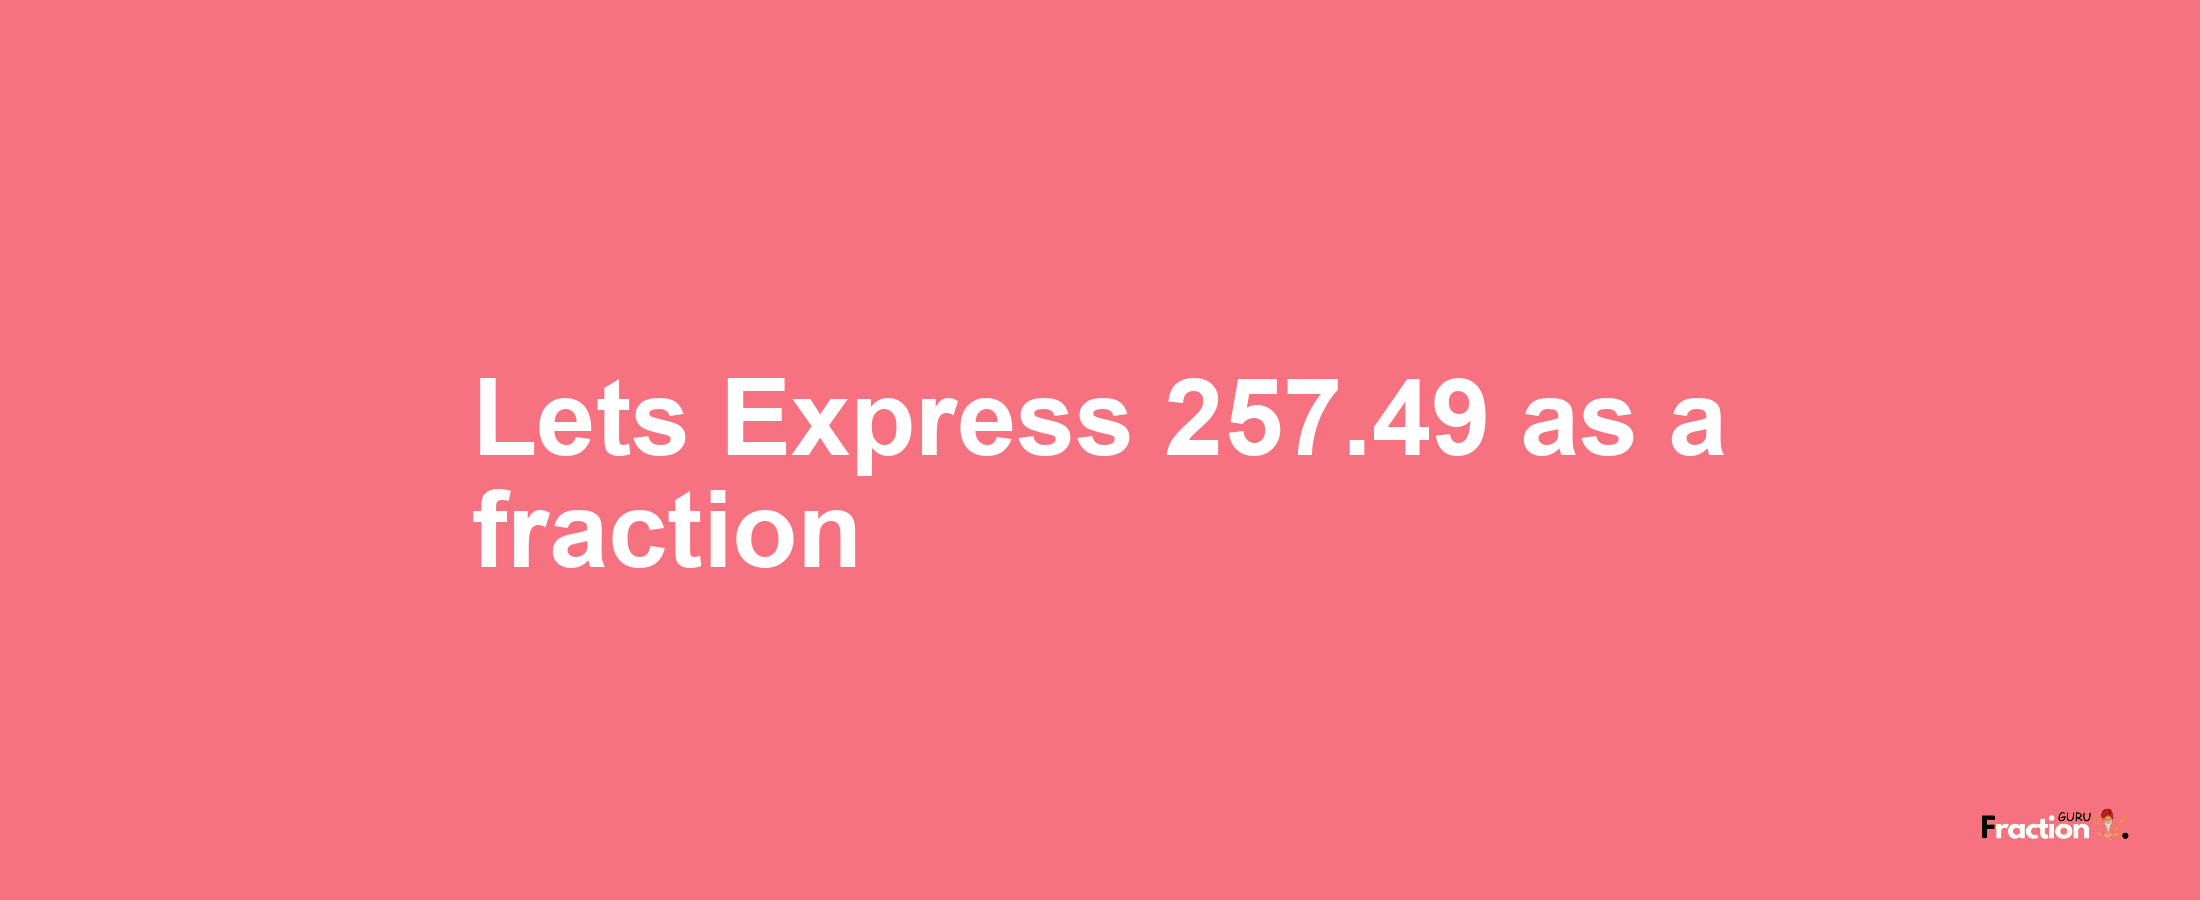 Lets Express 257.49 as afraction